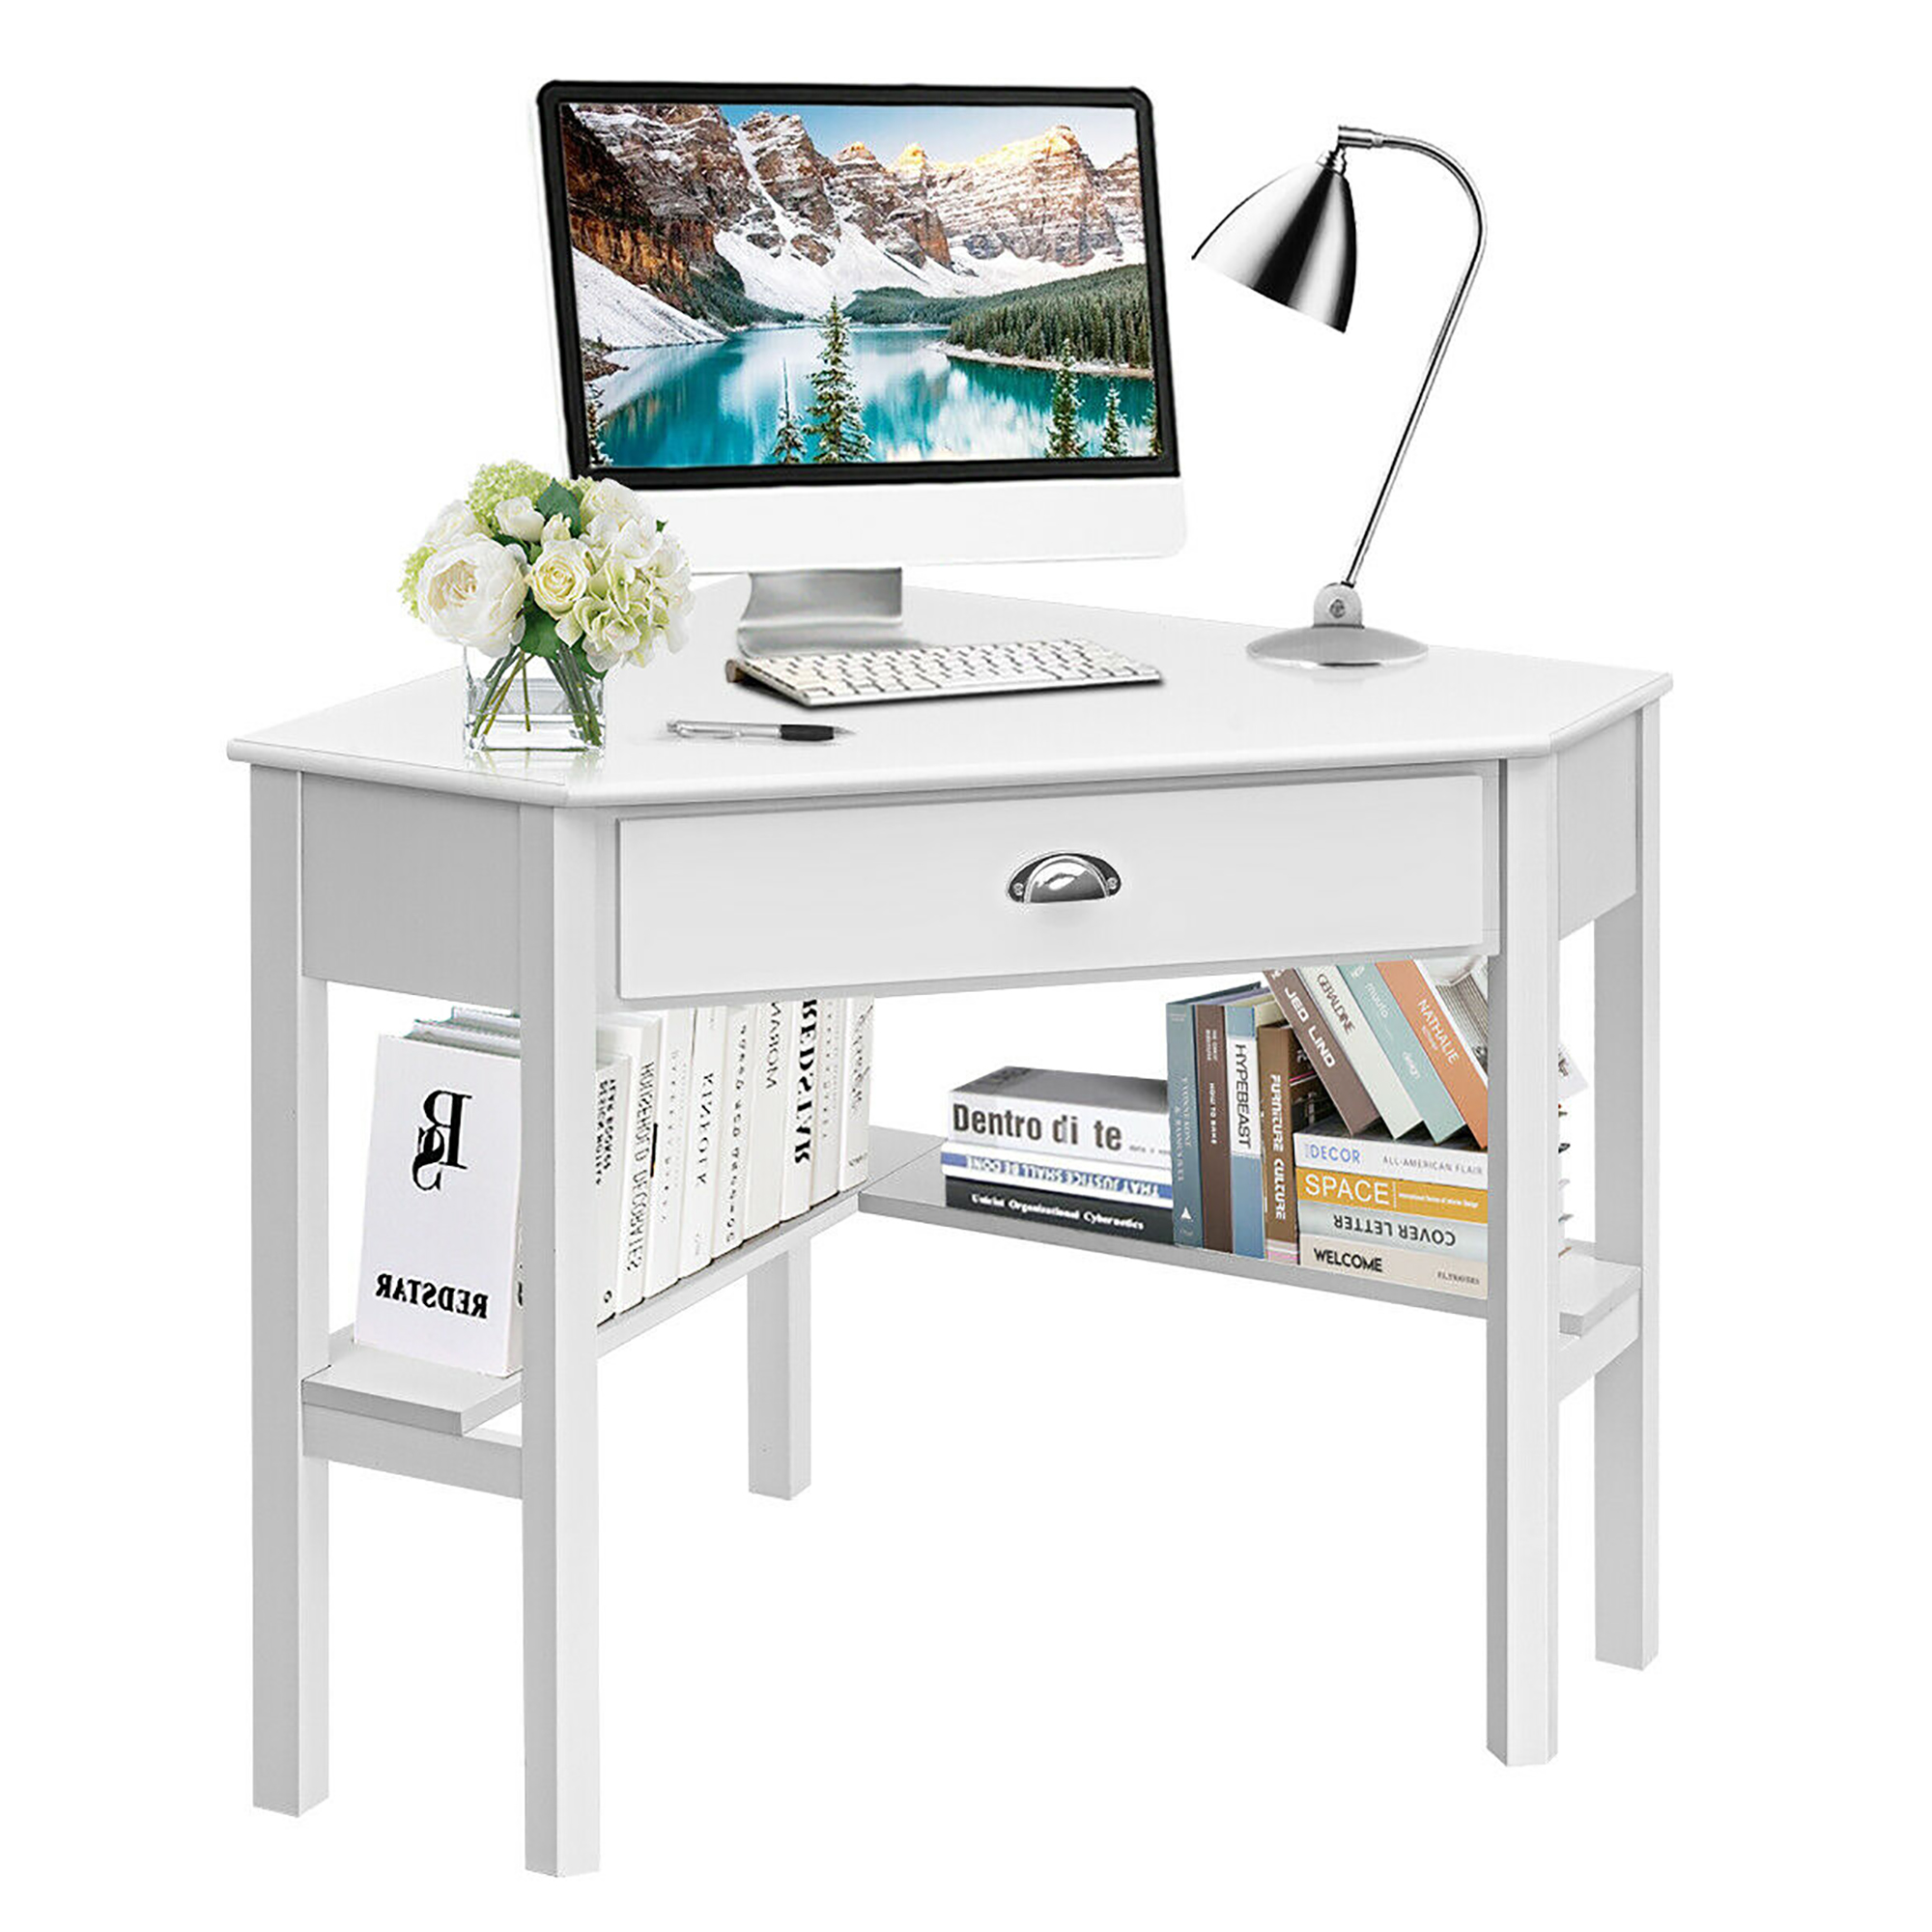 Costway Triangle Computer Desk Corner Office Desk Laptop Table w/ Drawer Shelves Rustic White - image 1 of 10